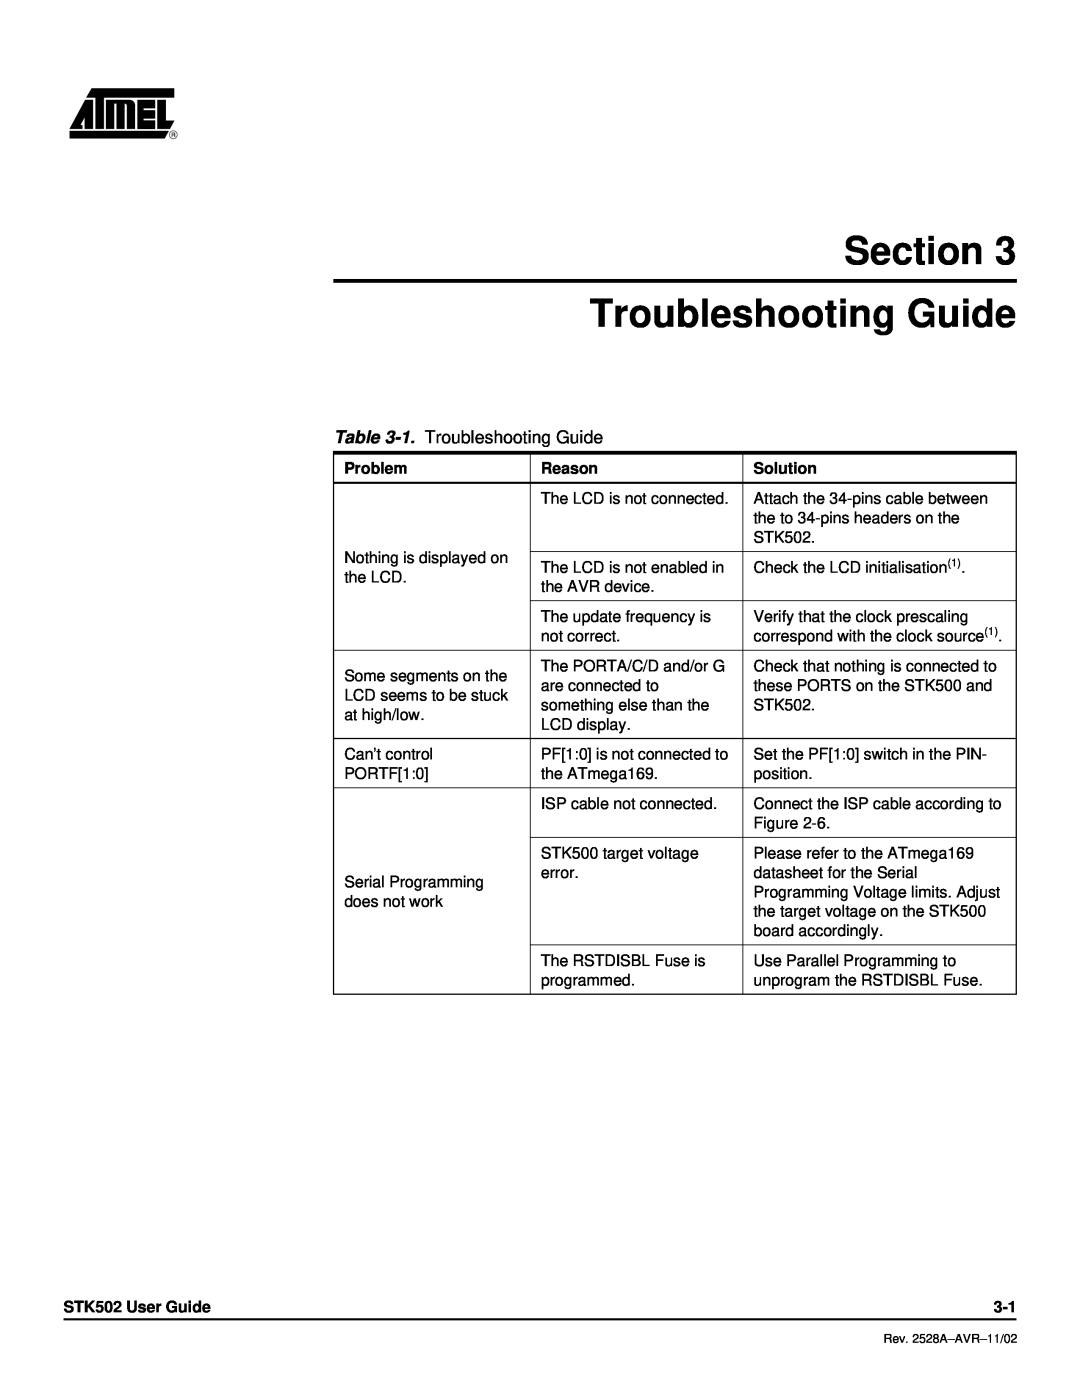 Atmel STK502 manual Section Troubleshooting Guide, 1. Troubleshooting Guide 